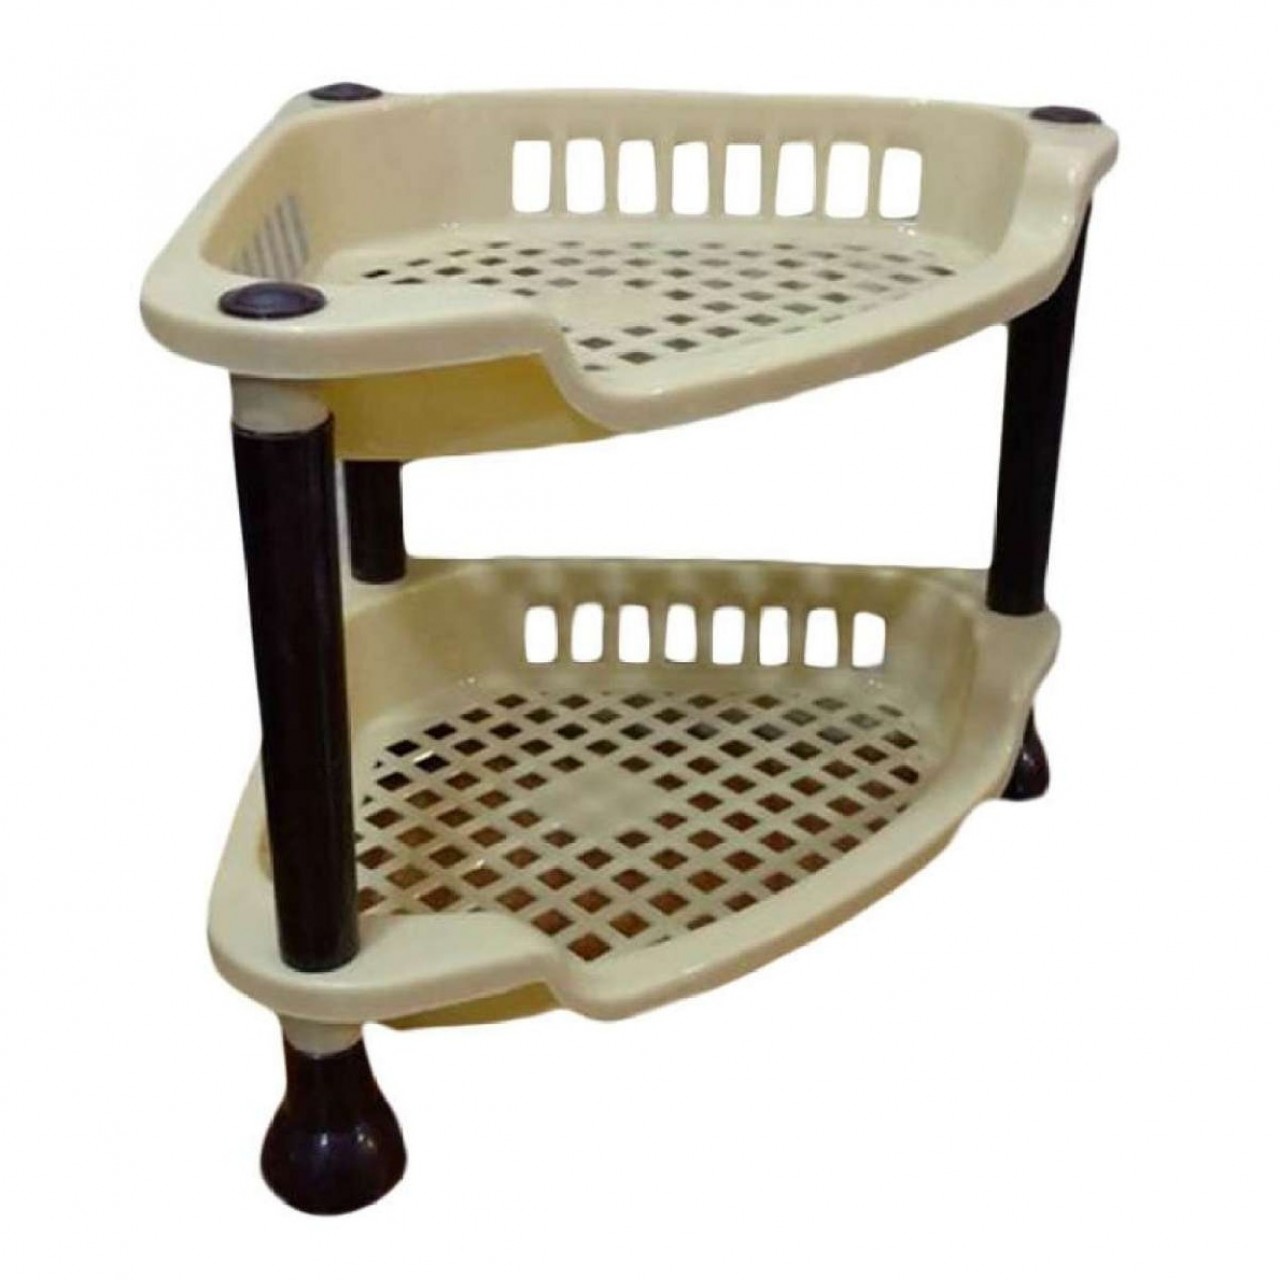 Two Layer Corner Rack - Compact Size - Suitable for Kitchens & Bathrooms